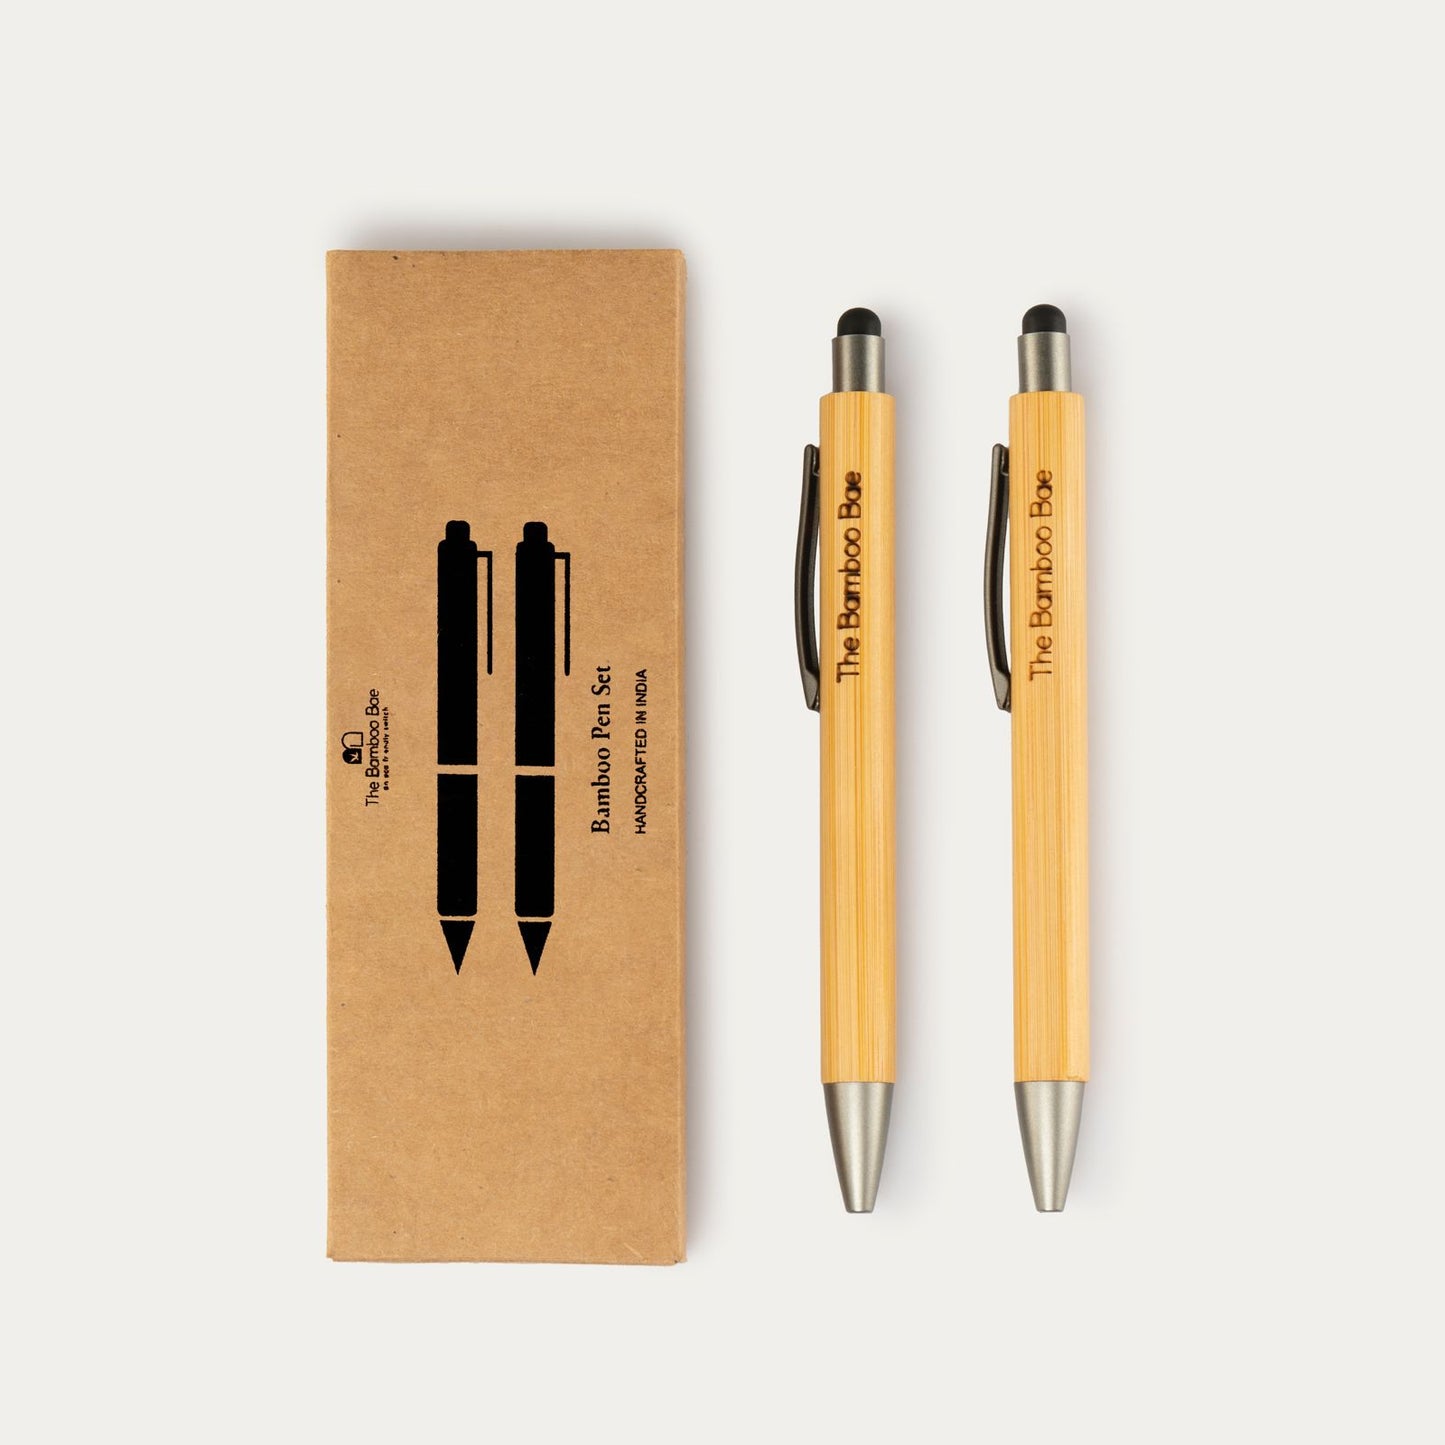 Bamboo Basics Gift Box | Sustainable Cork Diary Bamboo Mobile Stand Pen